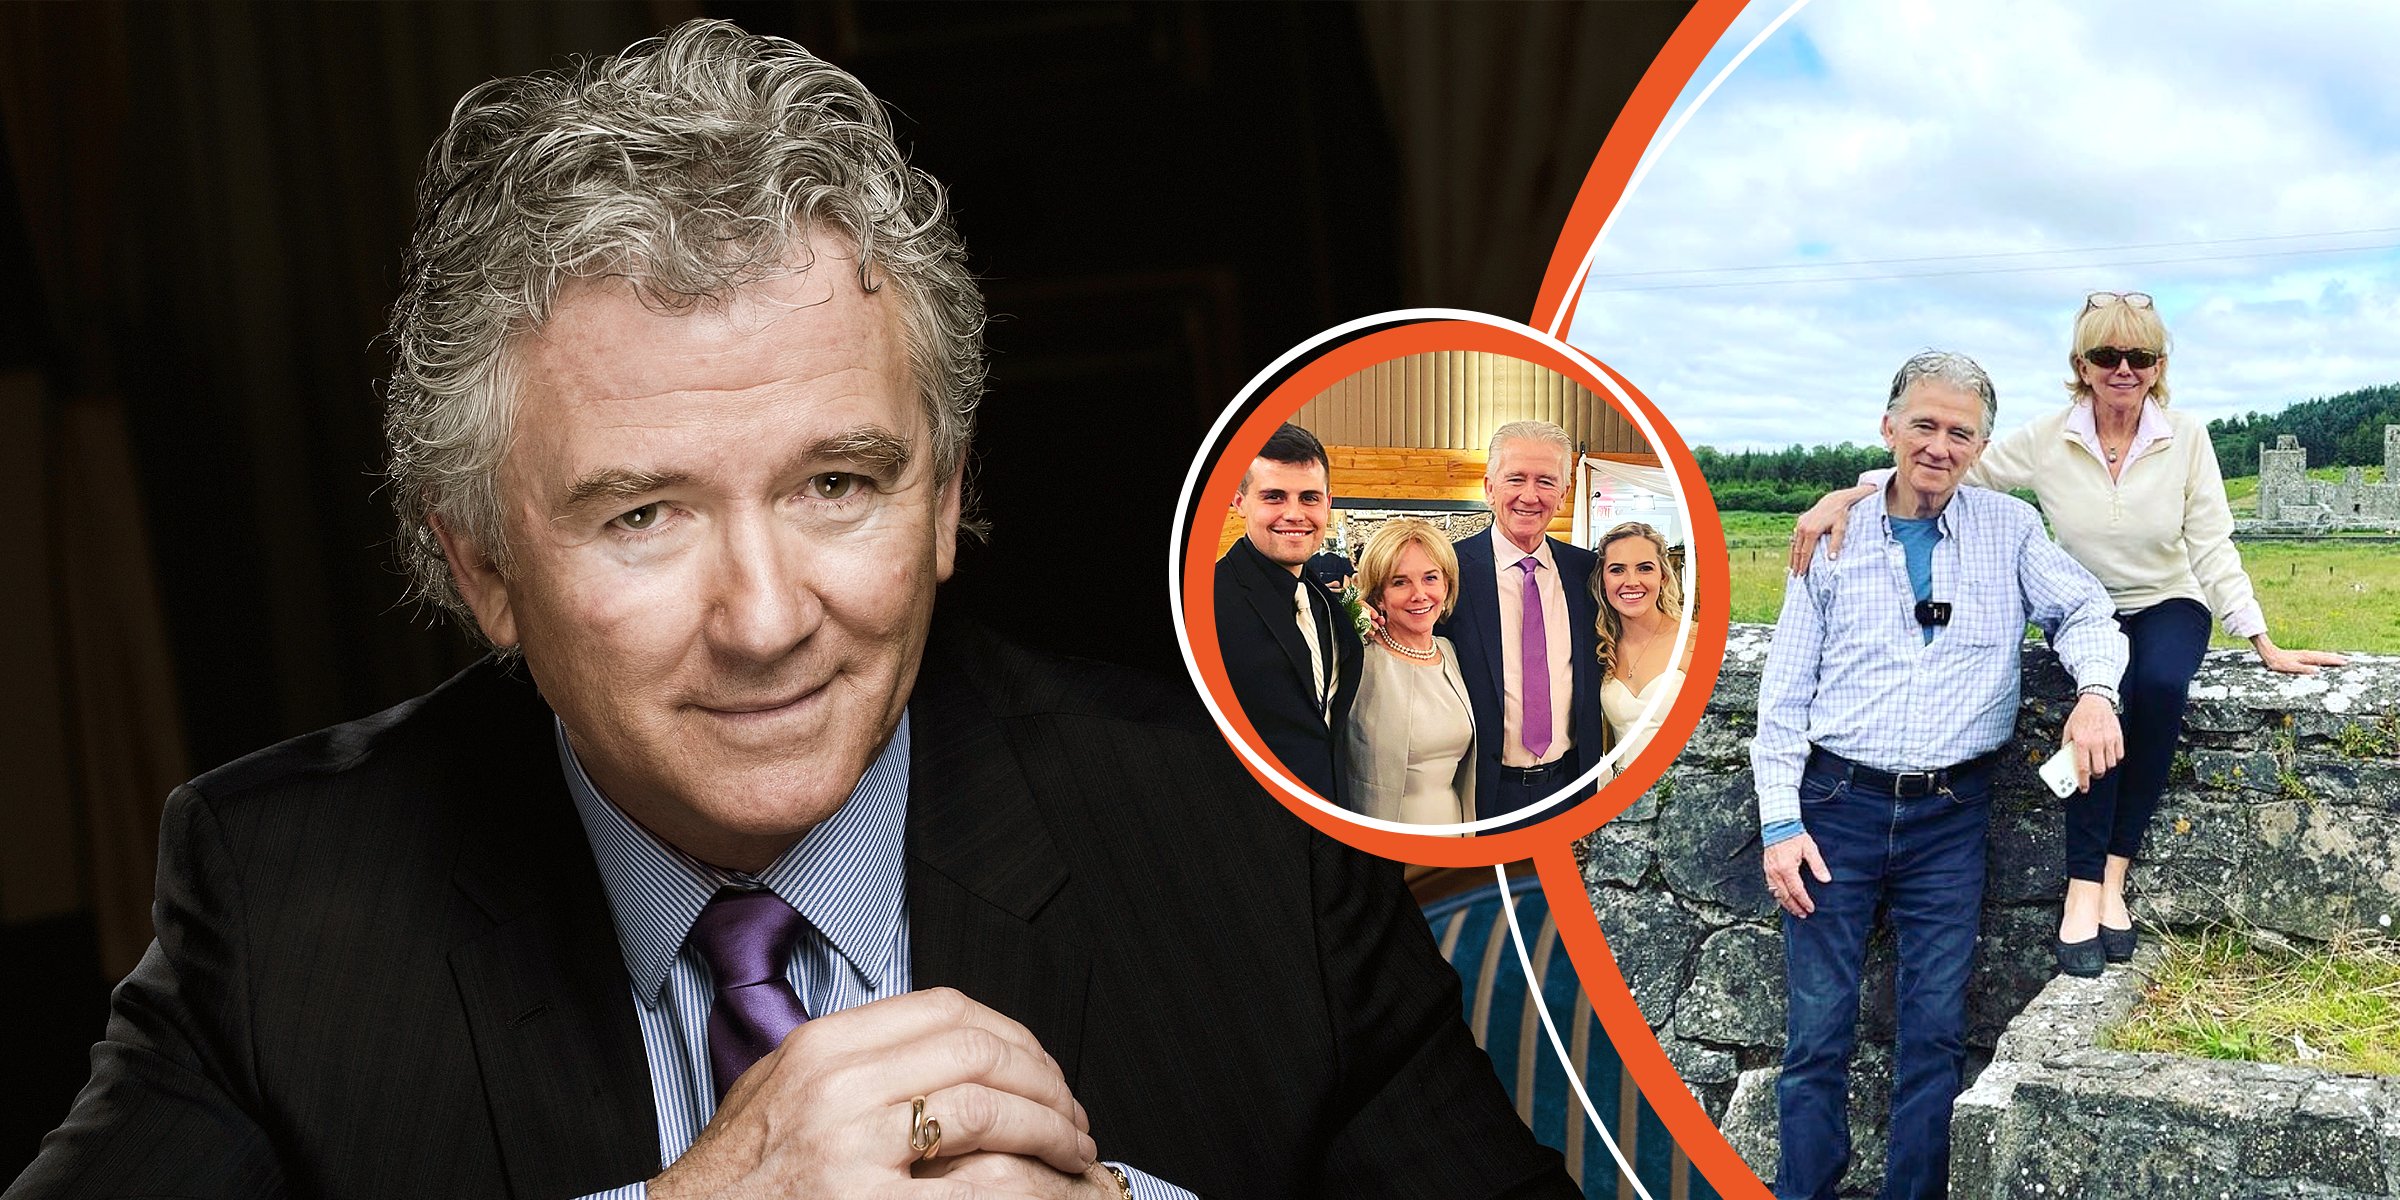 Patrick Duffy | Patrick Duffy,  his children Padriac and Conor and Linda Purl. | Patric Duffy and Linda Purl | Source: Instagram.com/Linda Purl | Getty Images  